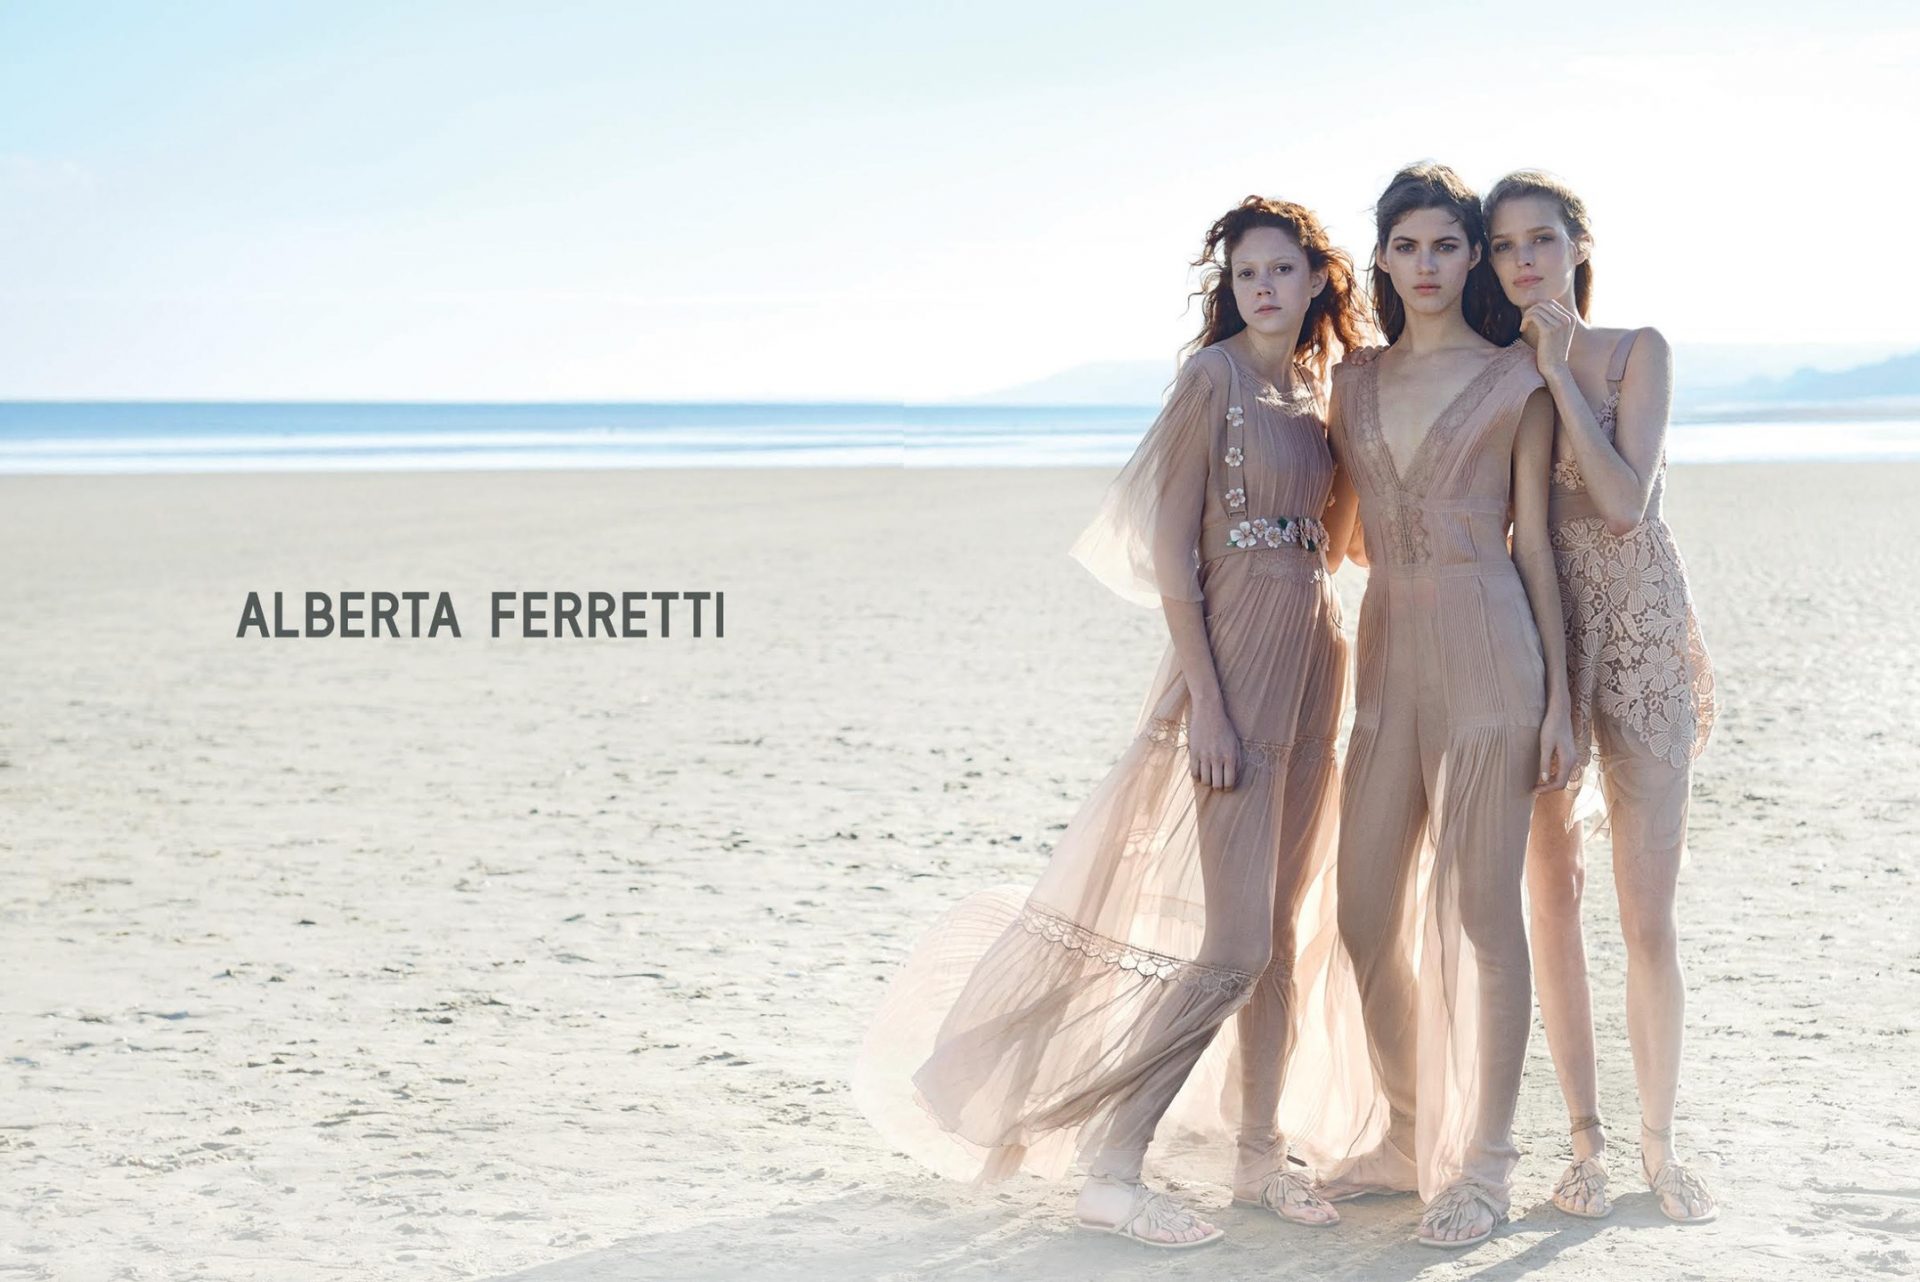 Alberta Ferretti Spring/Summer 2015 Photographed By Peter Lindbergh